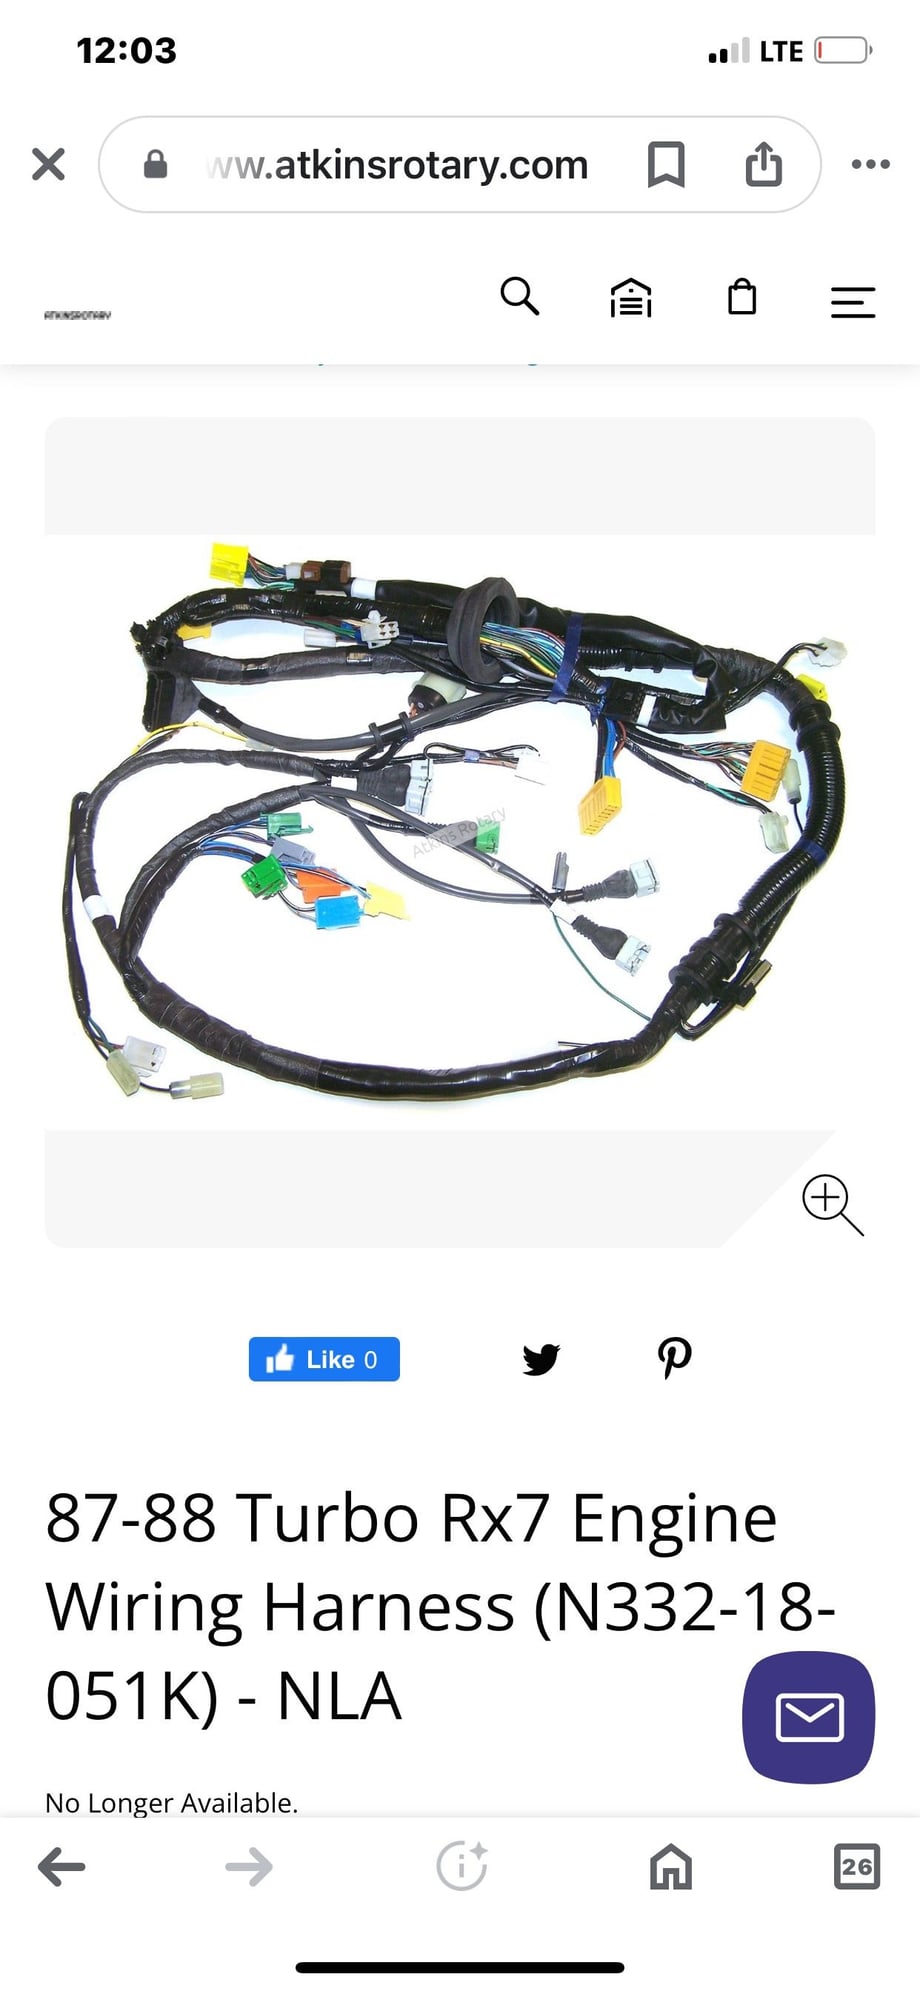 Engine - Electrical - Want to buy 87-88 Turbo engine wiring harness with ECU - New or Used - 1987 to 1988 Mazda RX-7 - Prince Frederick, MD 20678, United States